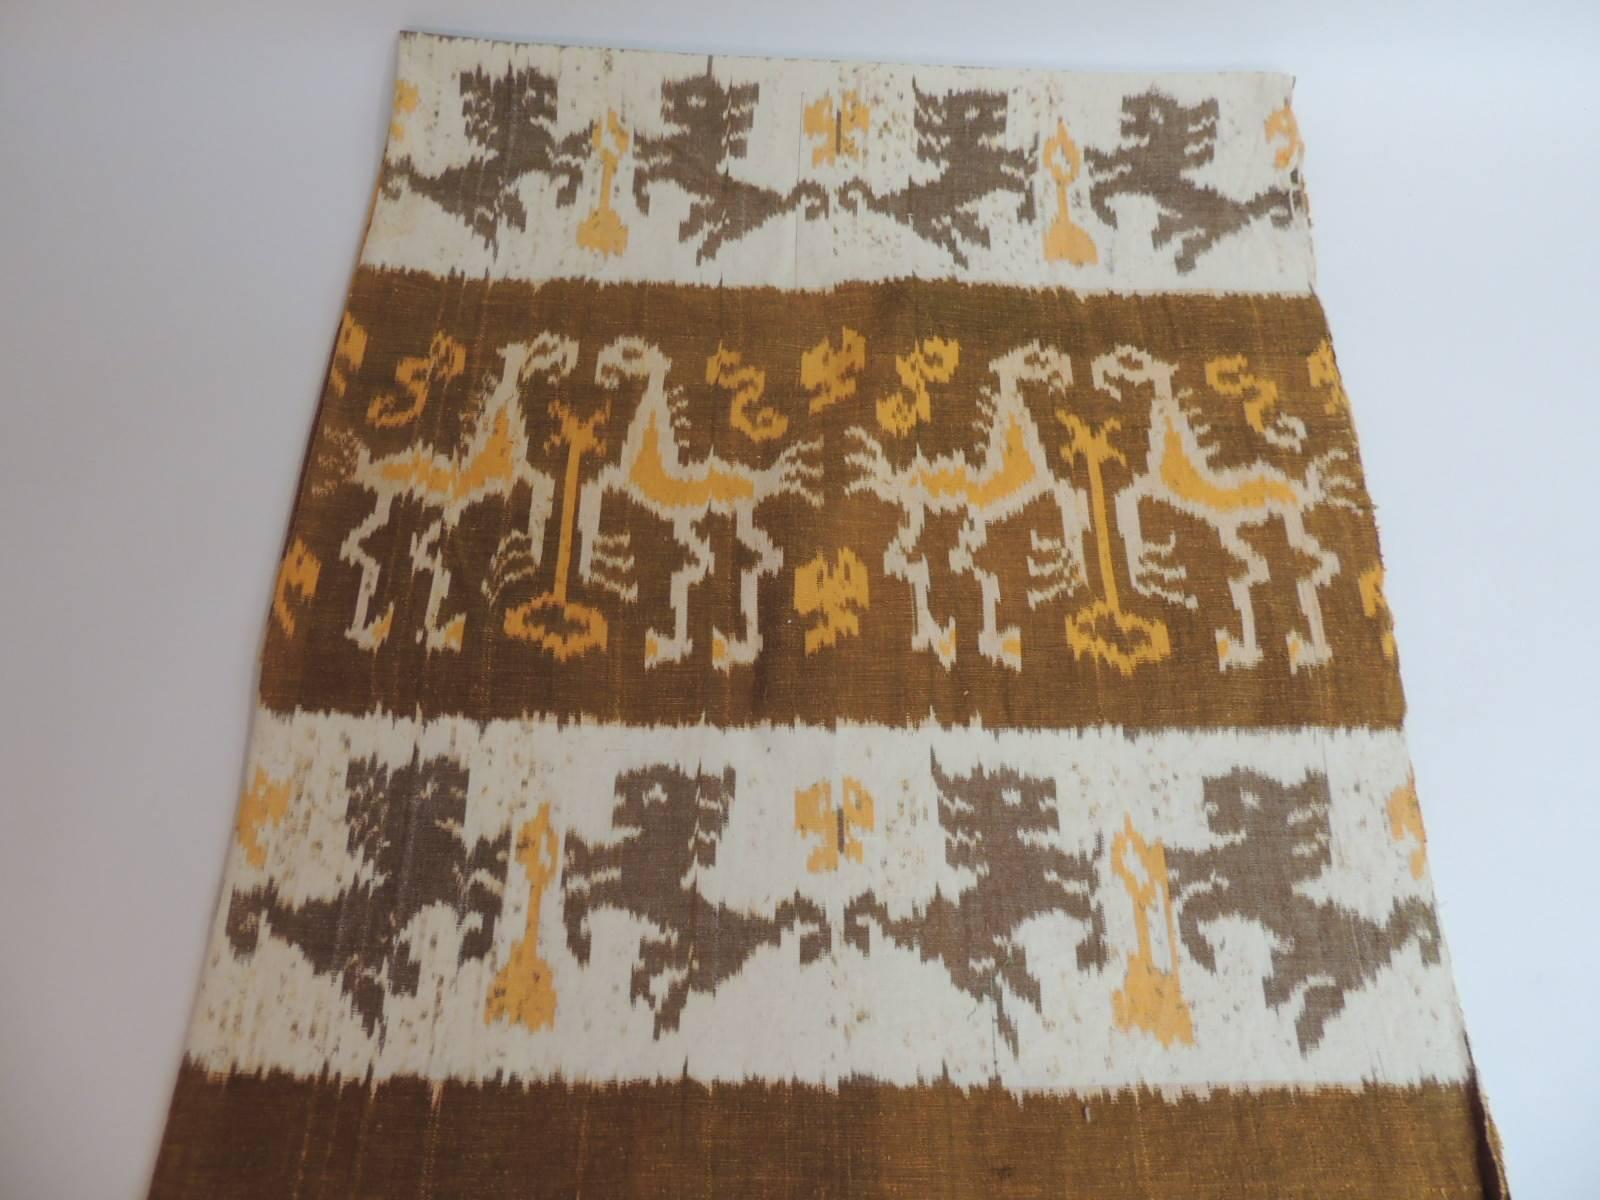 Offered by the Antique Textiles Galleries:
Vintage woven yellow and natural Ikat textile panel with fringes
Large Ikat textile panel/throw with fringes on both ends. Depicting tribal anthropomorphic figures of lions and horses. Decorated with warp